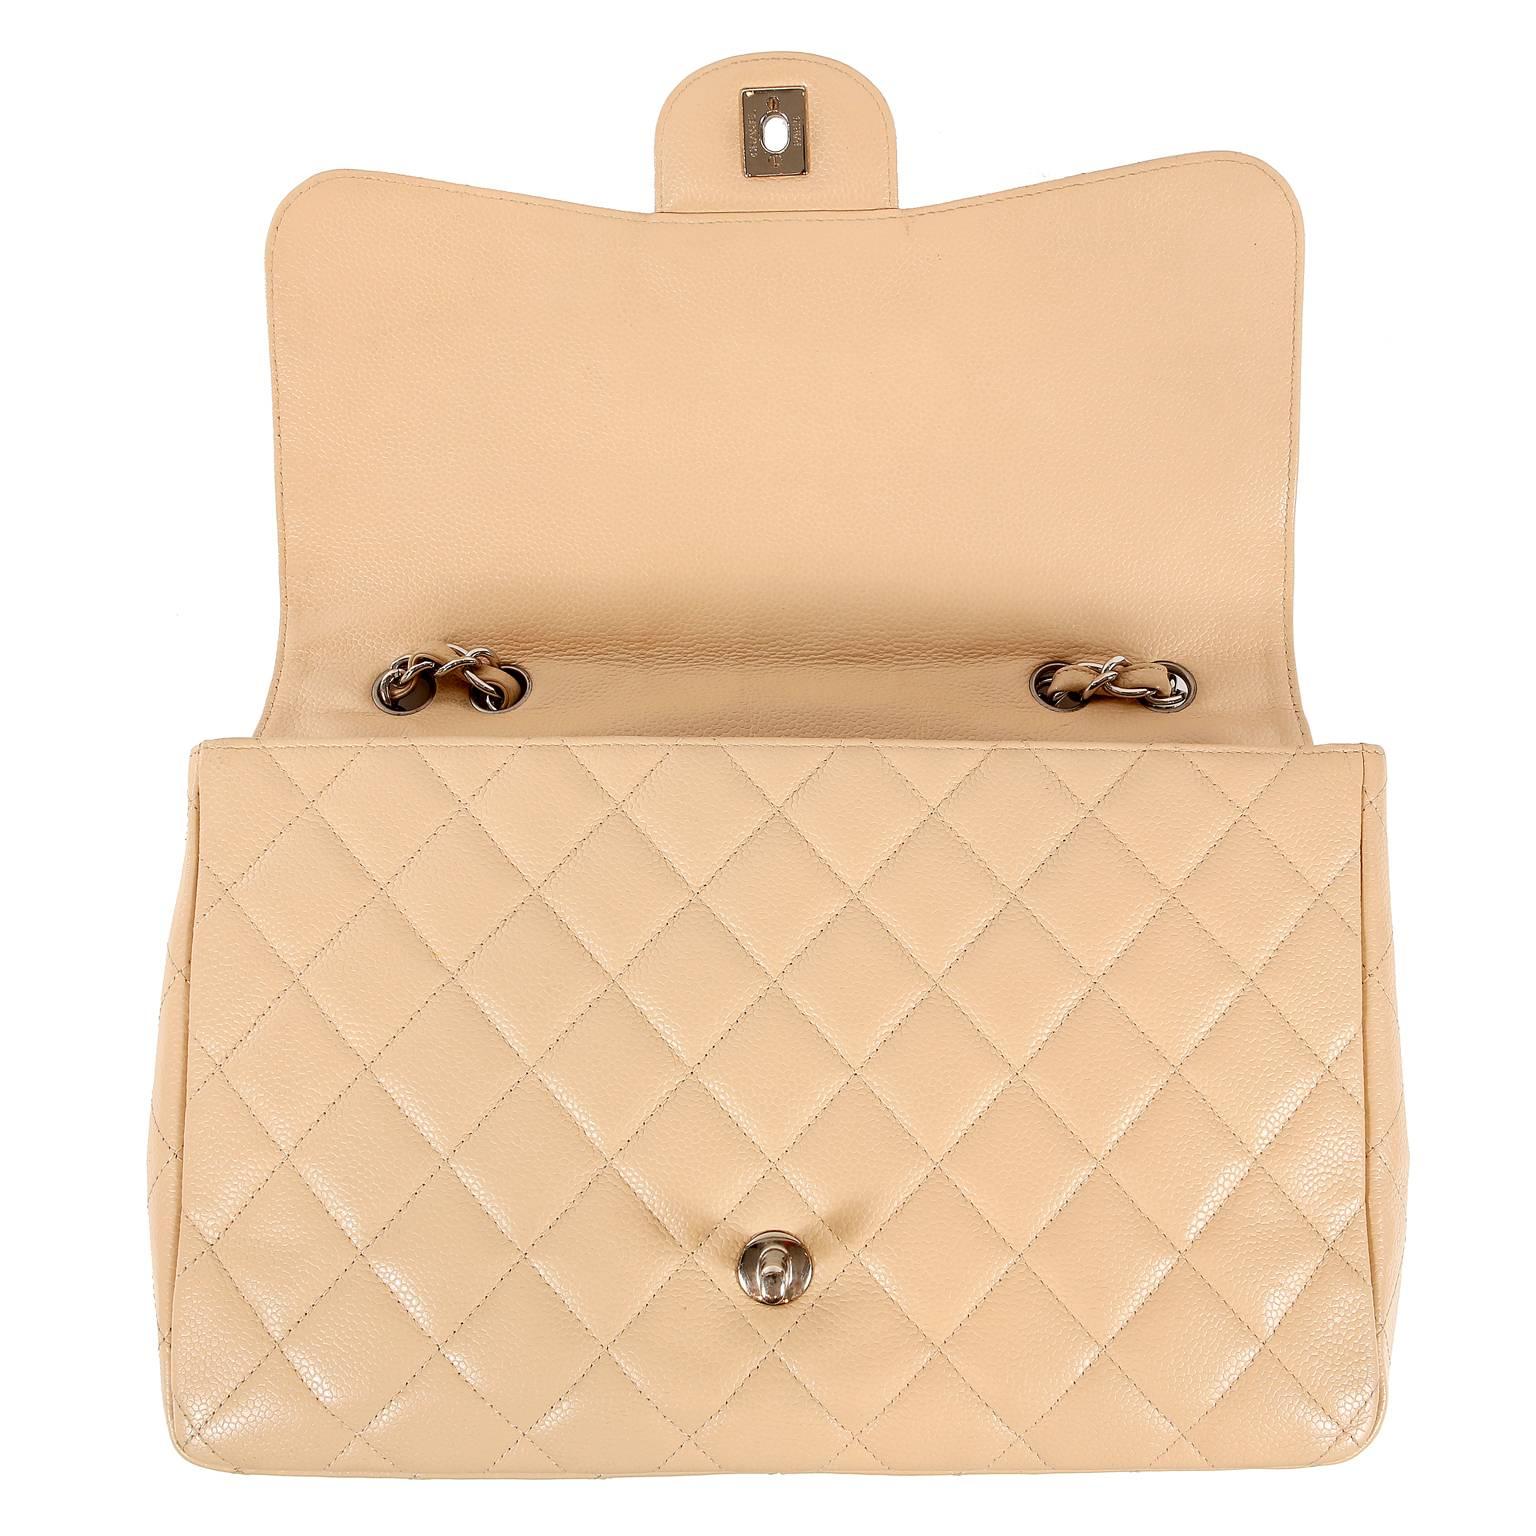 Chanel Beige Clair Caviar Leather Jumbo Classic Flap Bag with Silver HW 5